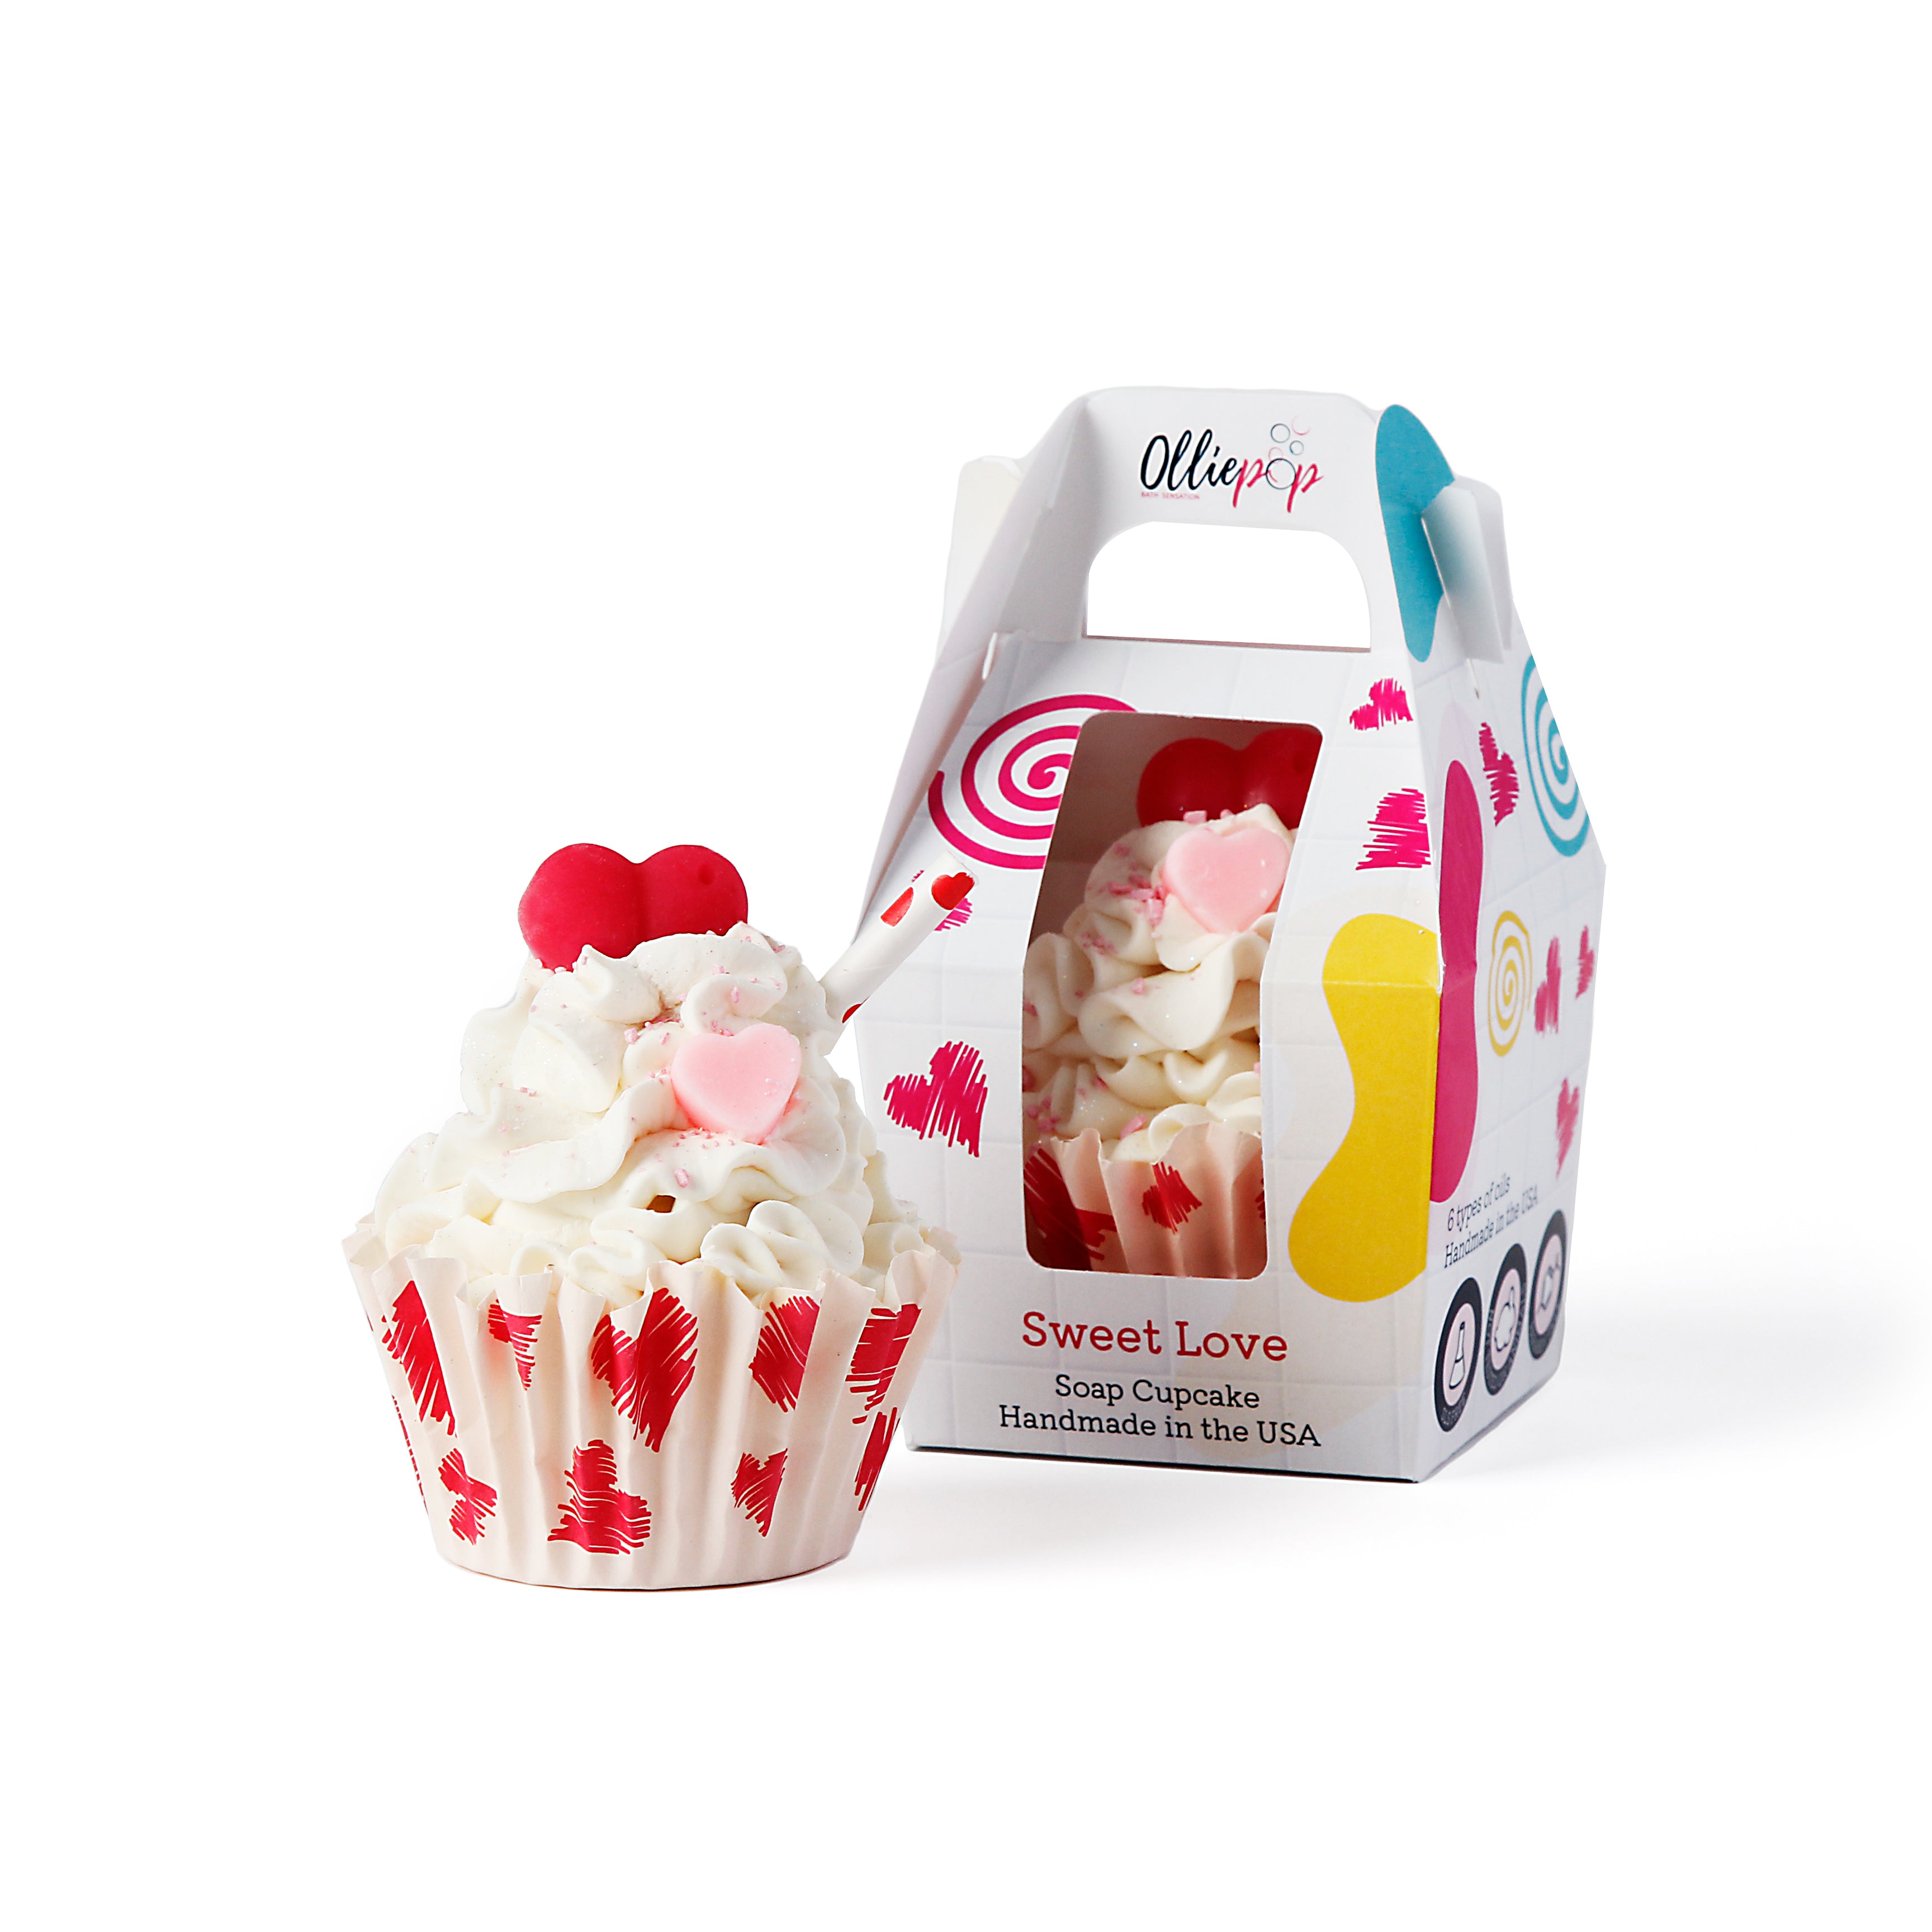 Sweet Love soap cupcake, packaged with our customized Olliepop packaging, perfect for gifts.